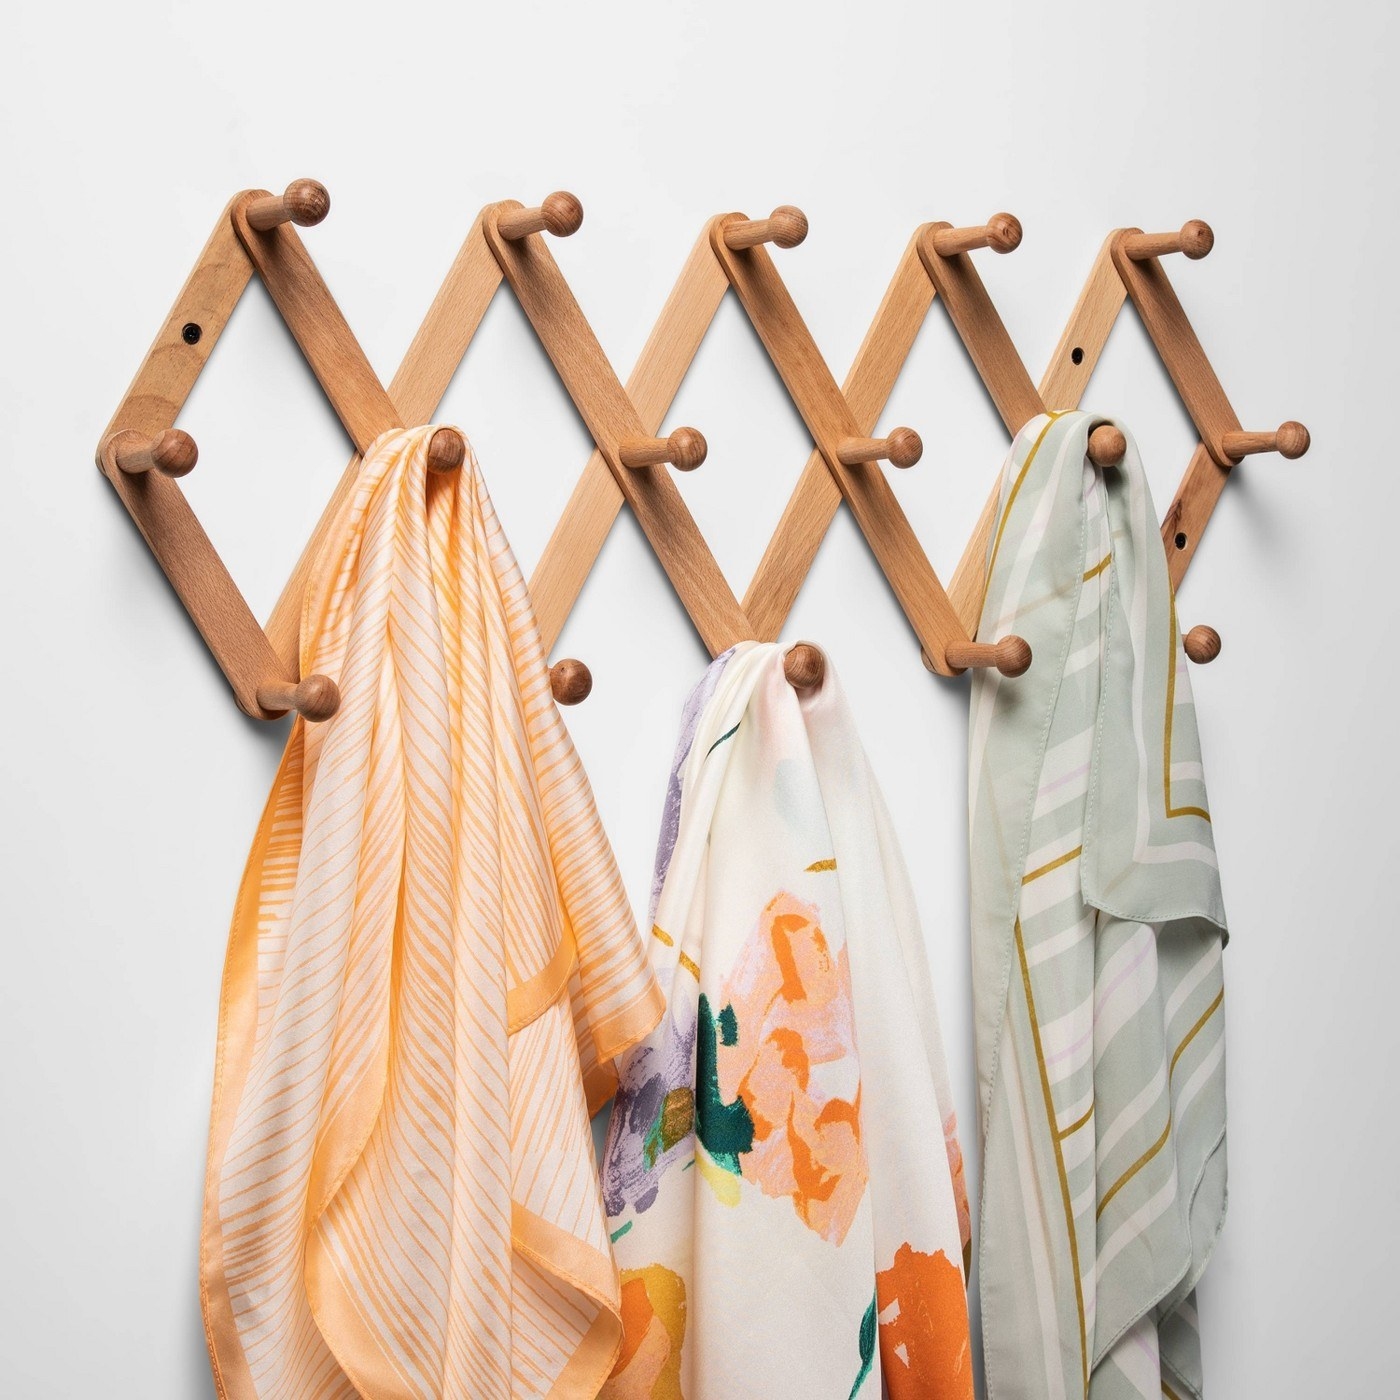 The wall hook rail with colorful scarves on it